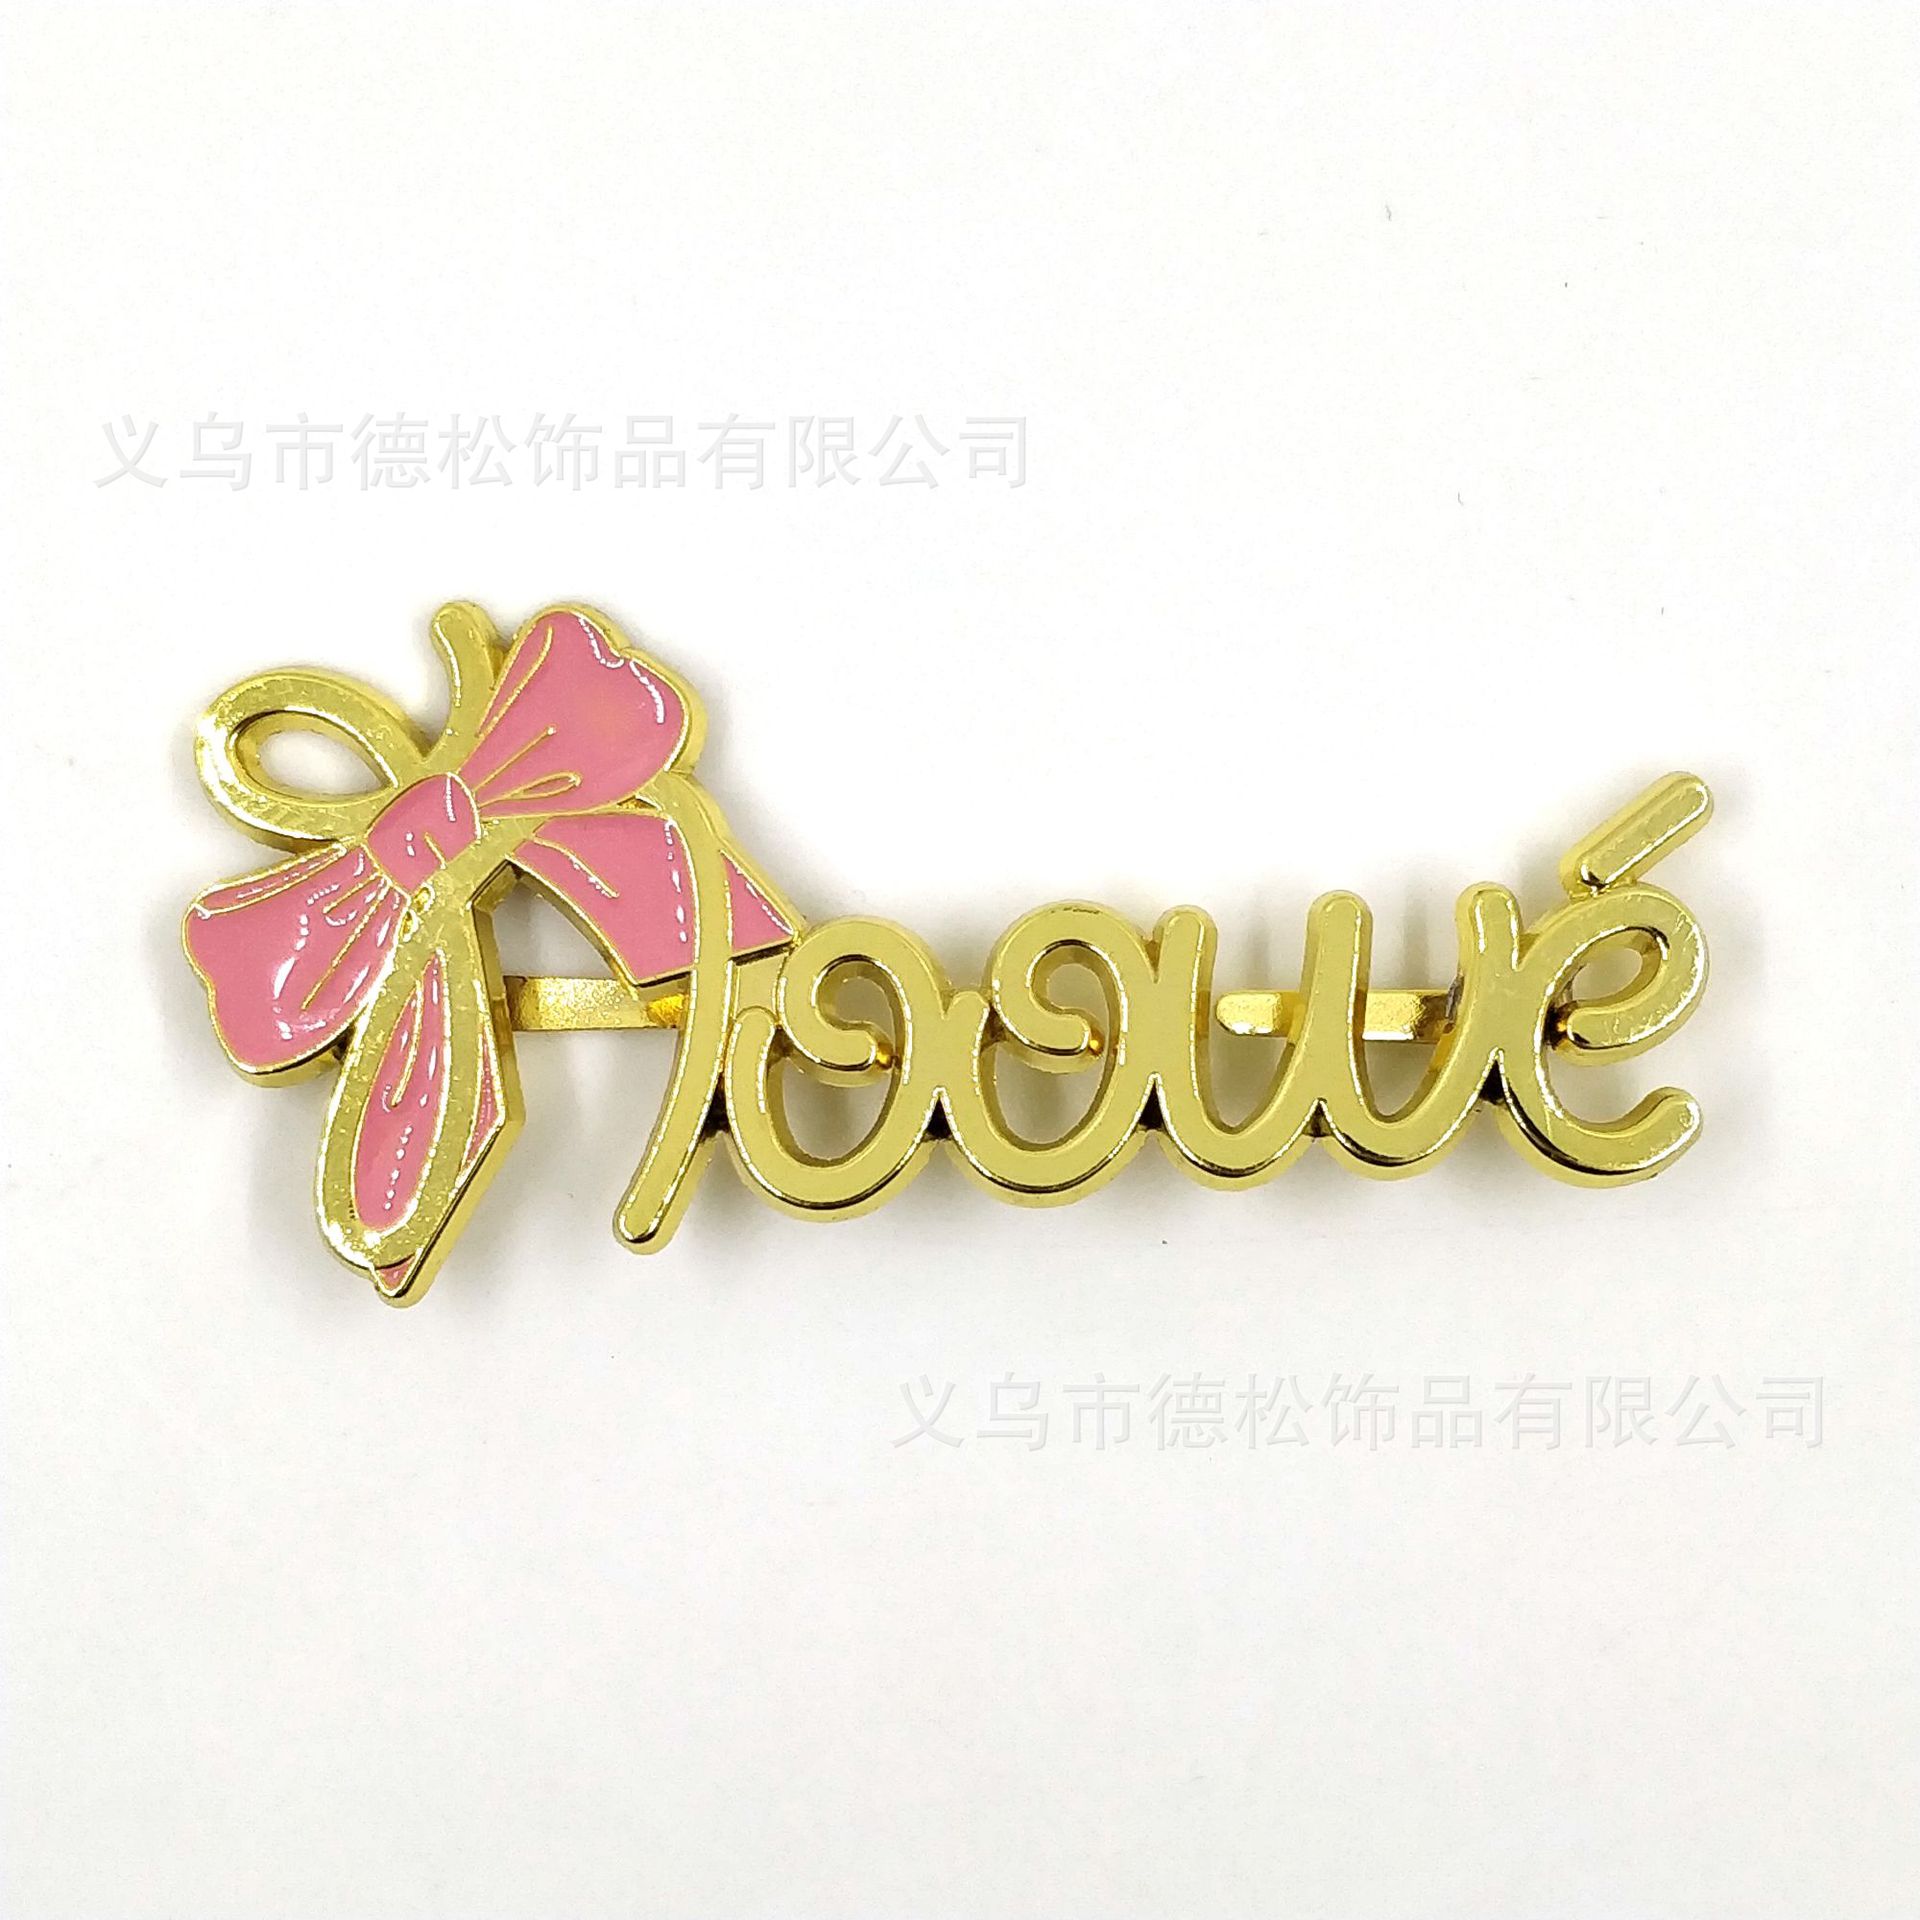 Die-Casting Zinc Alloy Pure Letter Pin Metal Badge Luggage Card Holder Decorative Metal DIY Handmade Small Sign